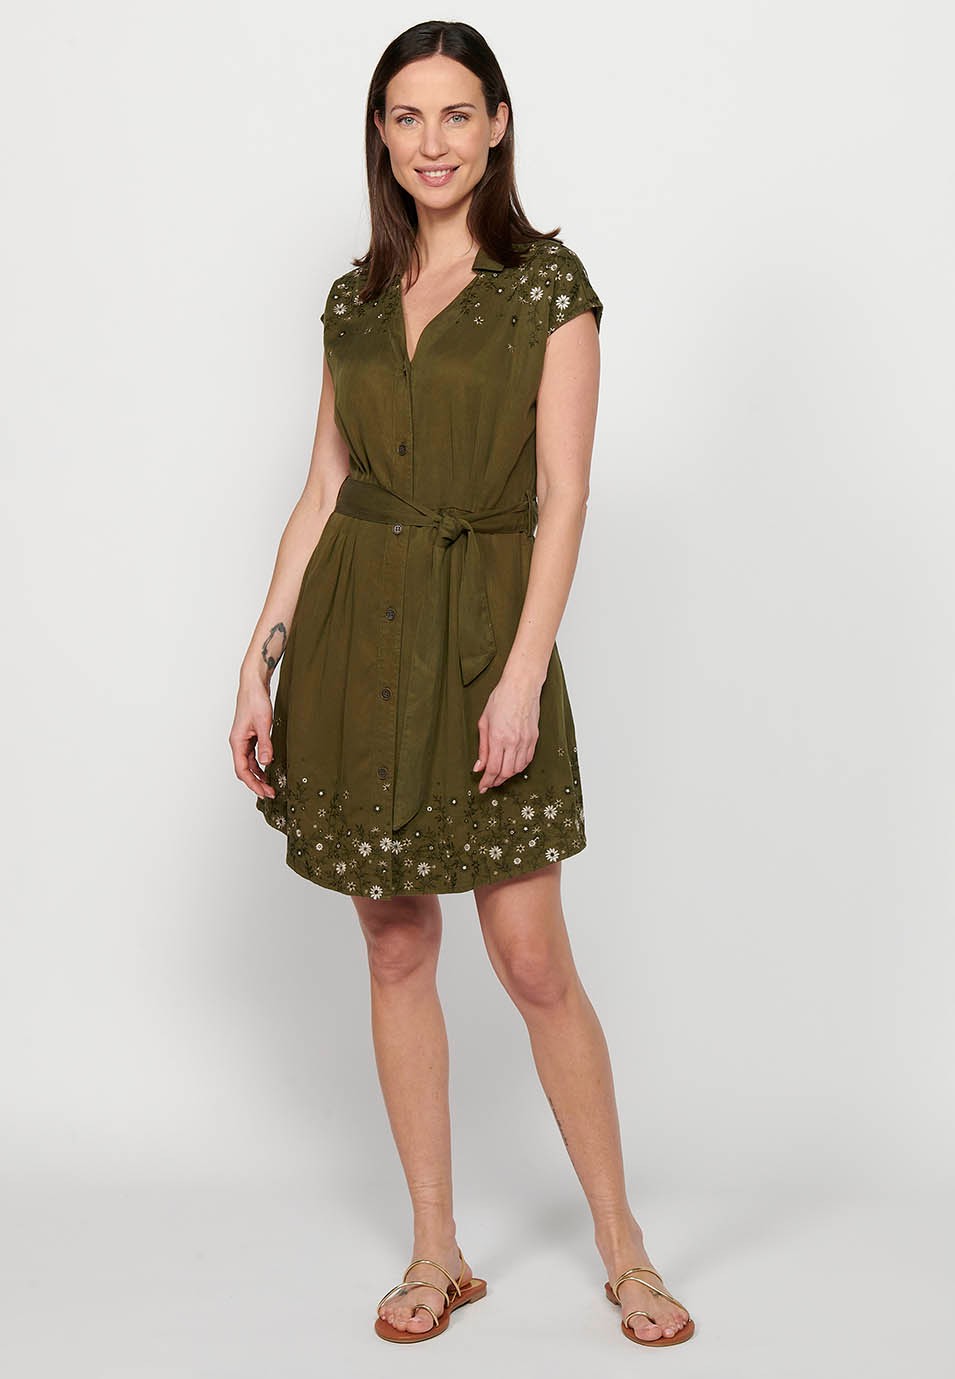 Short-sleeved midi dress with V-neckline and front button closure, fitted at the waist with embroidered details in Khaki color for Women